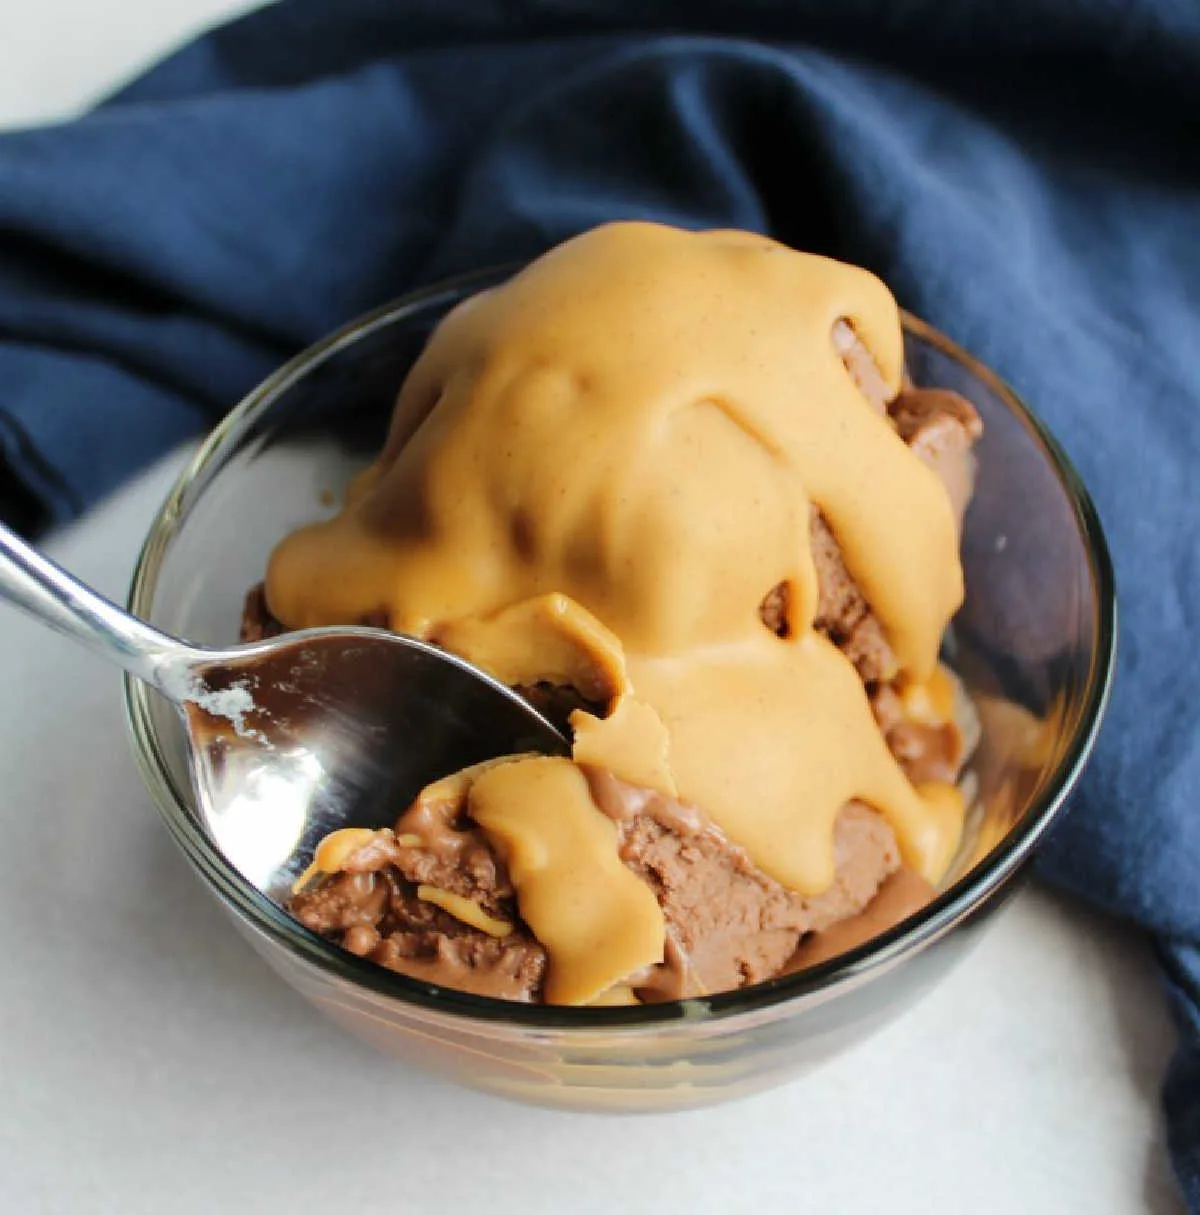 bowl of chocolate peanut butter banana ice cream with peanut butter magic shell on top with blue napkin.